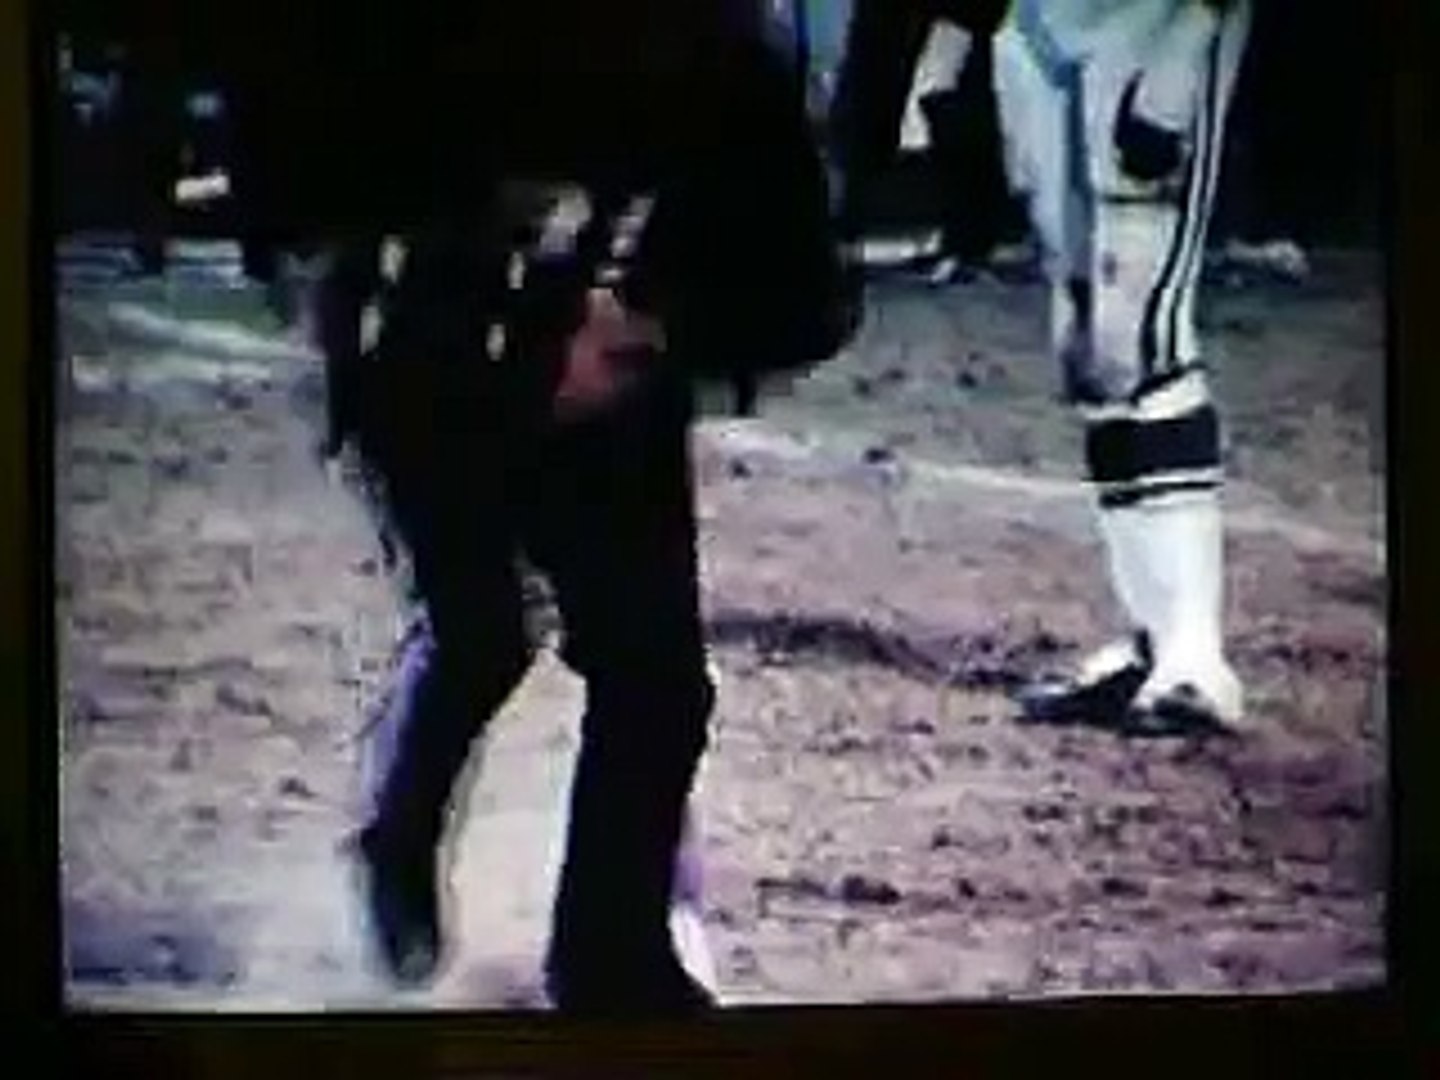 Baltimore colts mike curtis and the fan - video Dailymotion